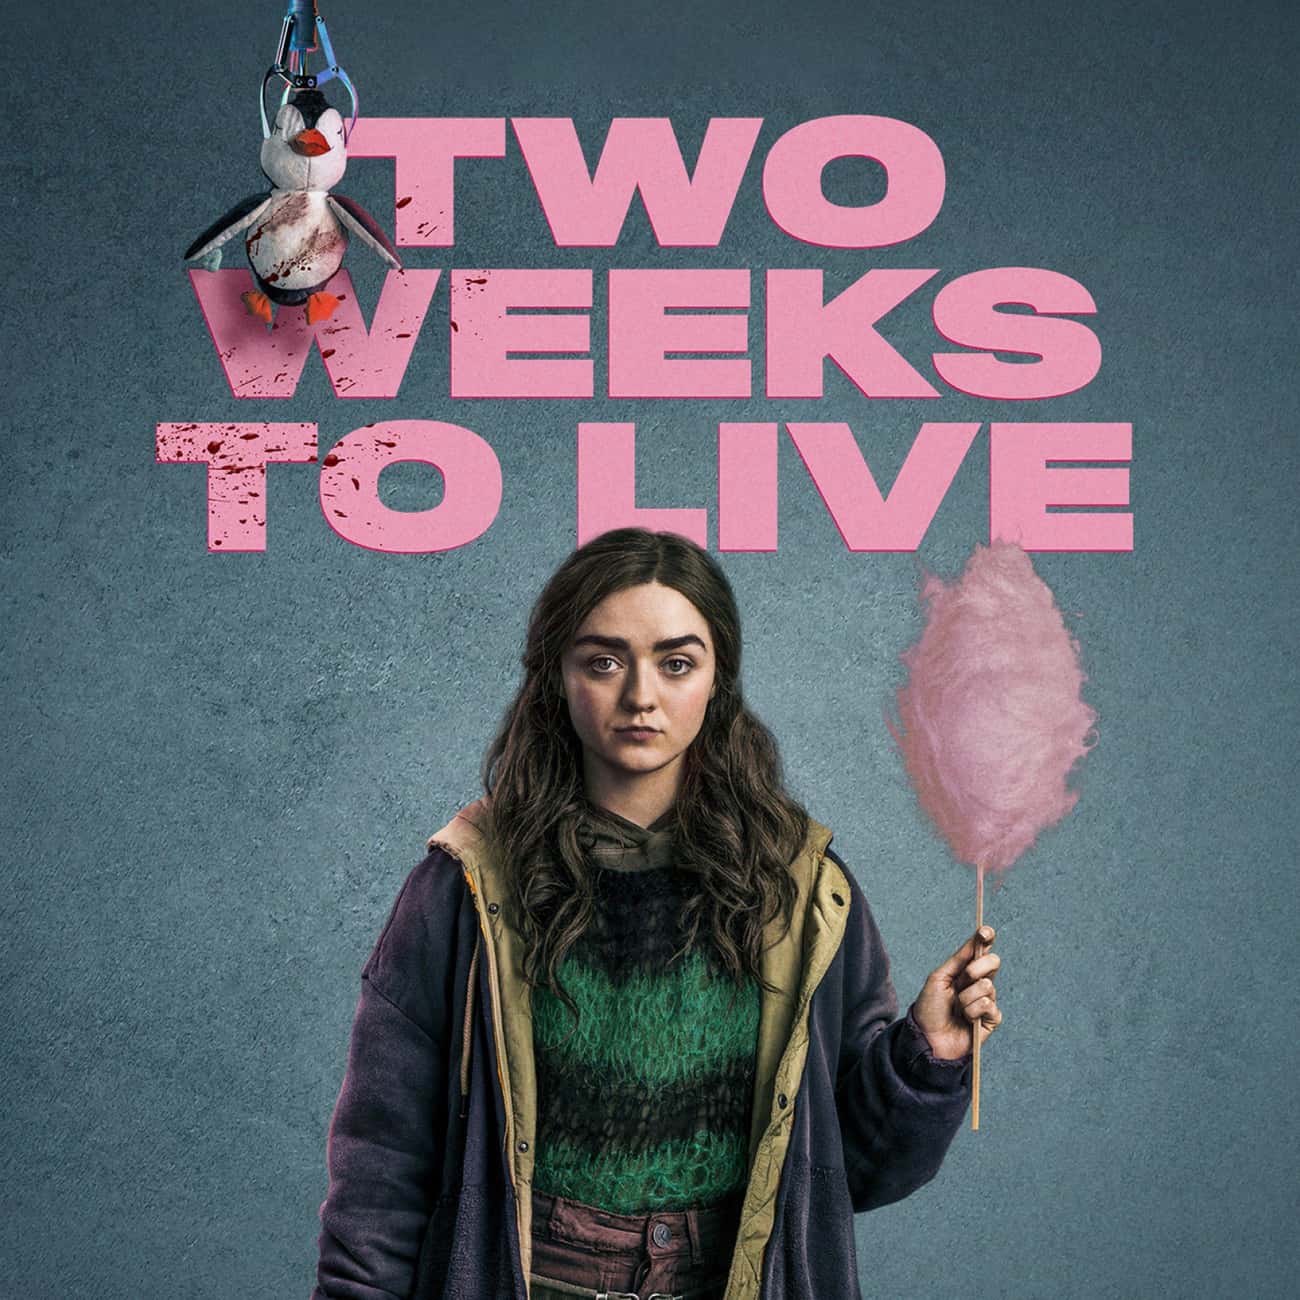 Two Weeks to Live